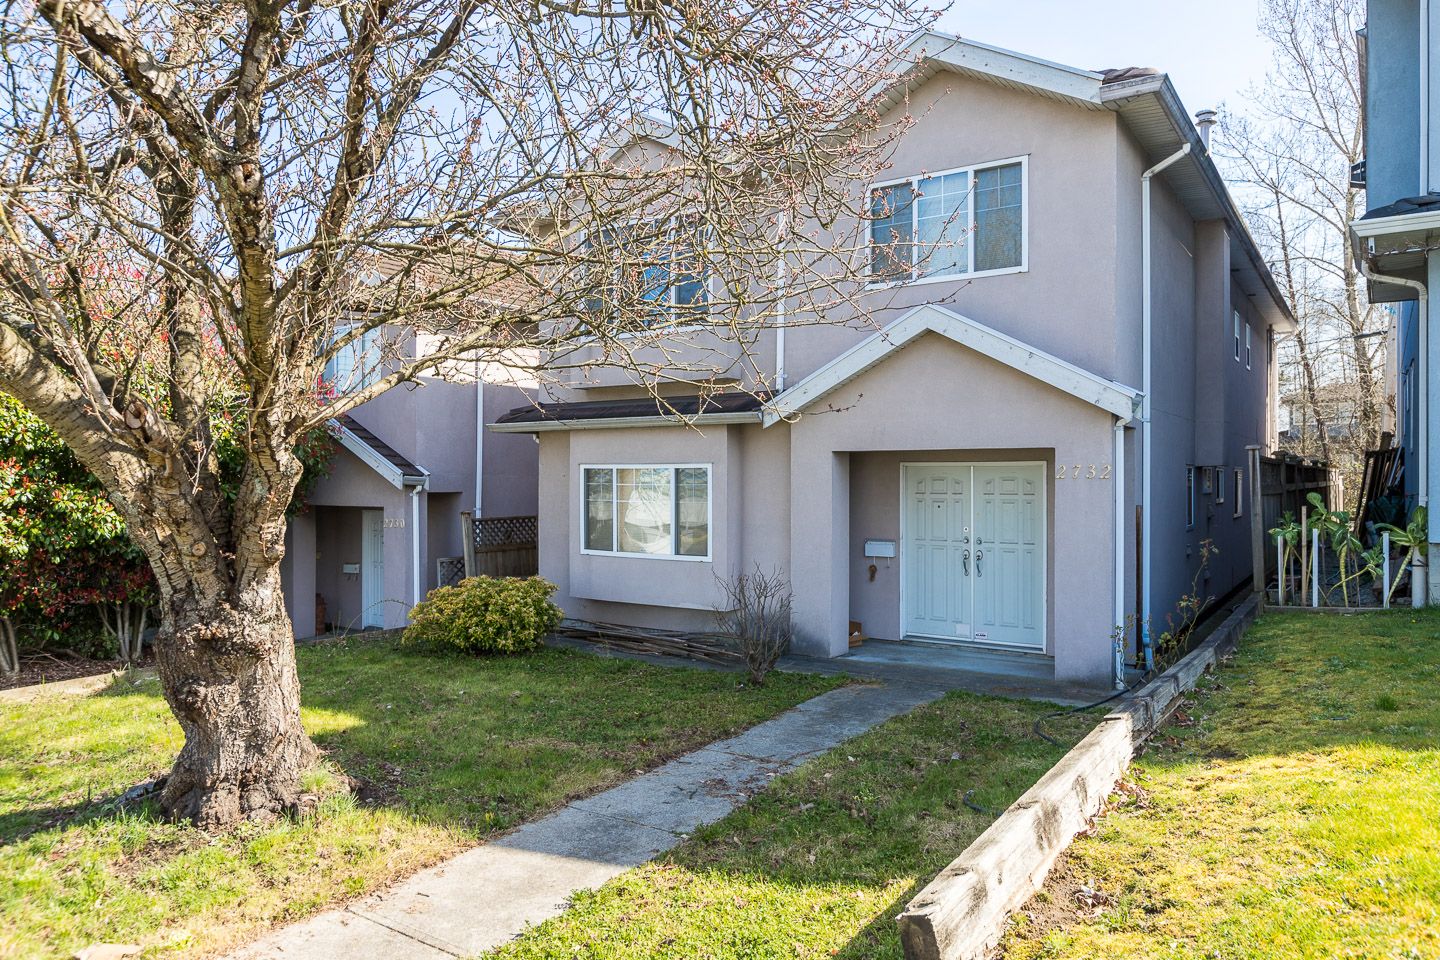 Main Photo: 2732 BOUNDARY RD in BURNABY: Central BN House for sale (Burnaby North)  : MLS®# R2559492